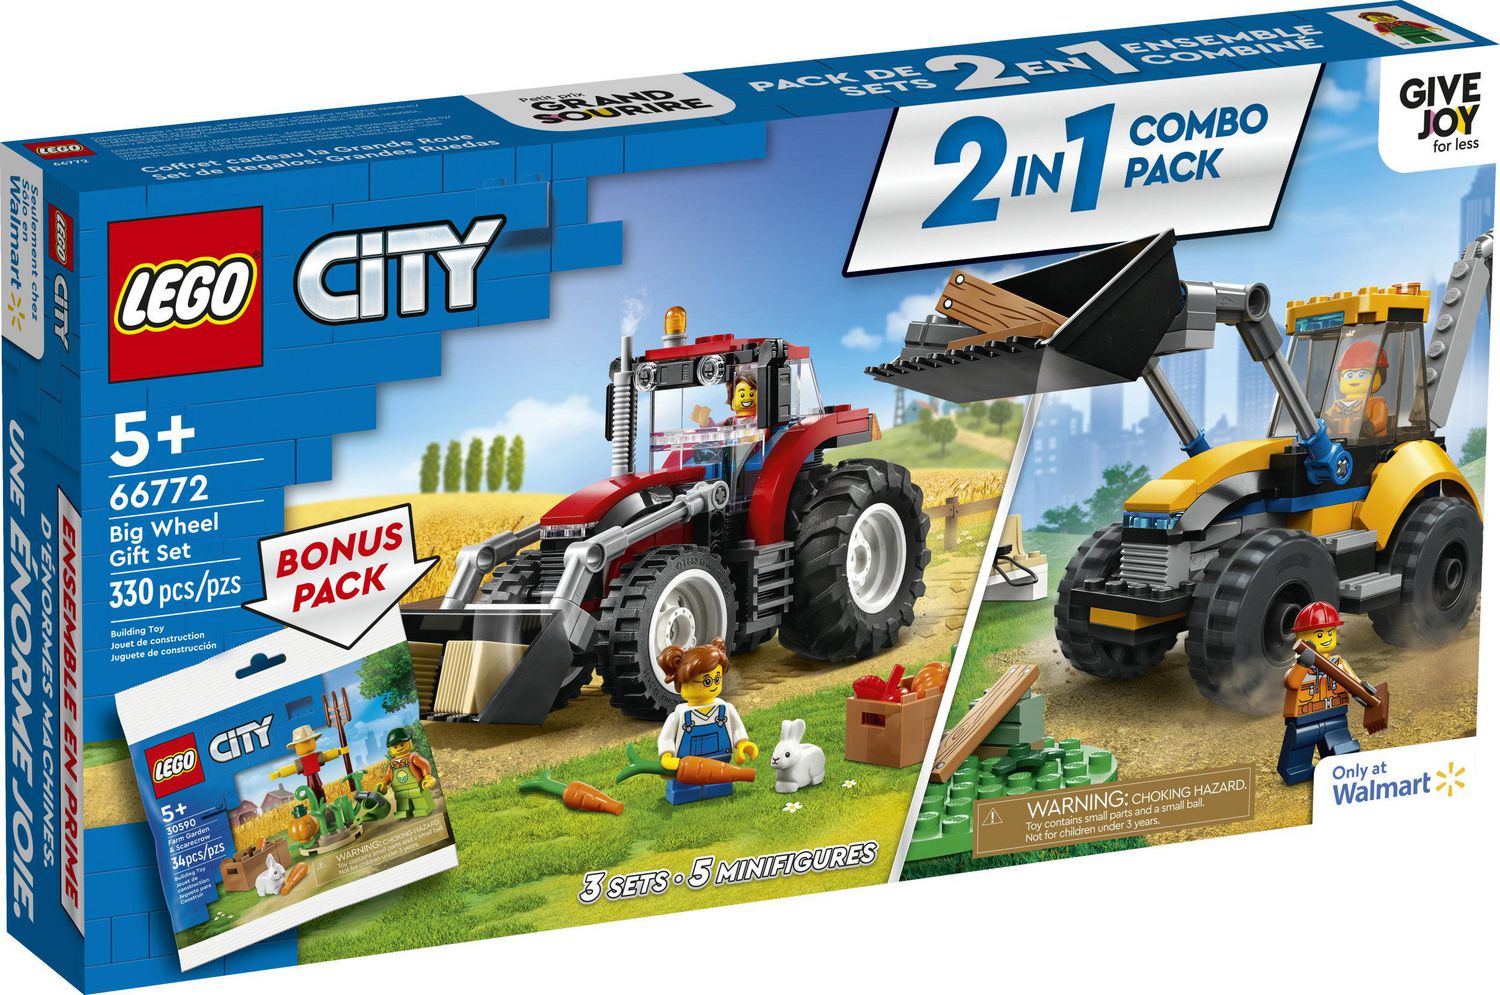 LEGO City Big Wheel Gift Set 66772, 2 in 1 Tractor and